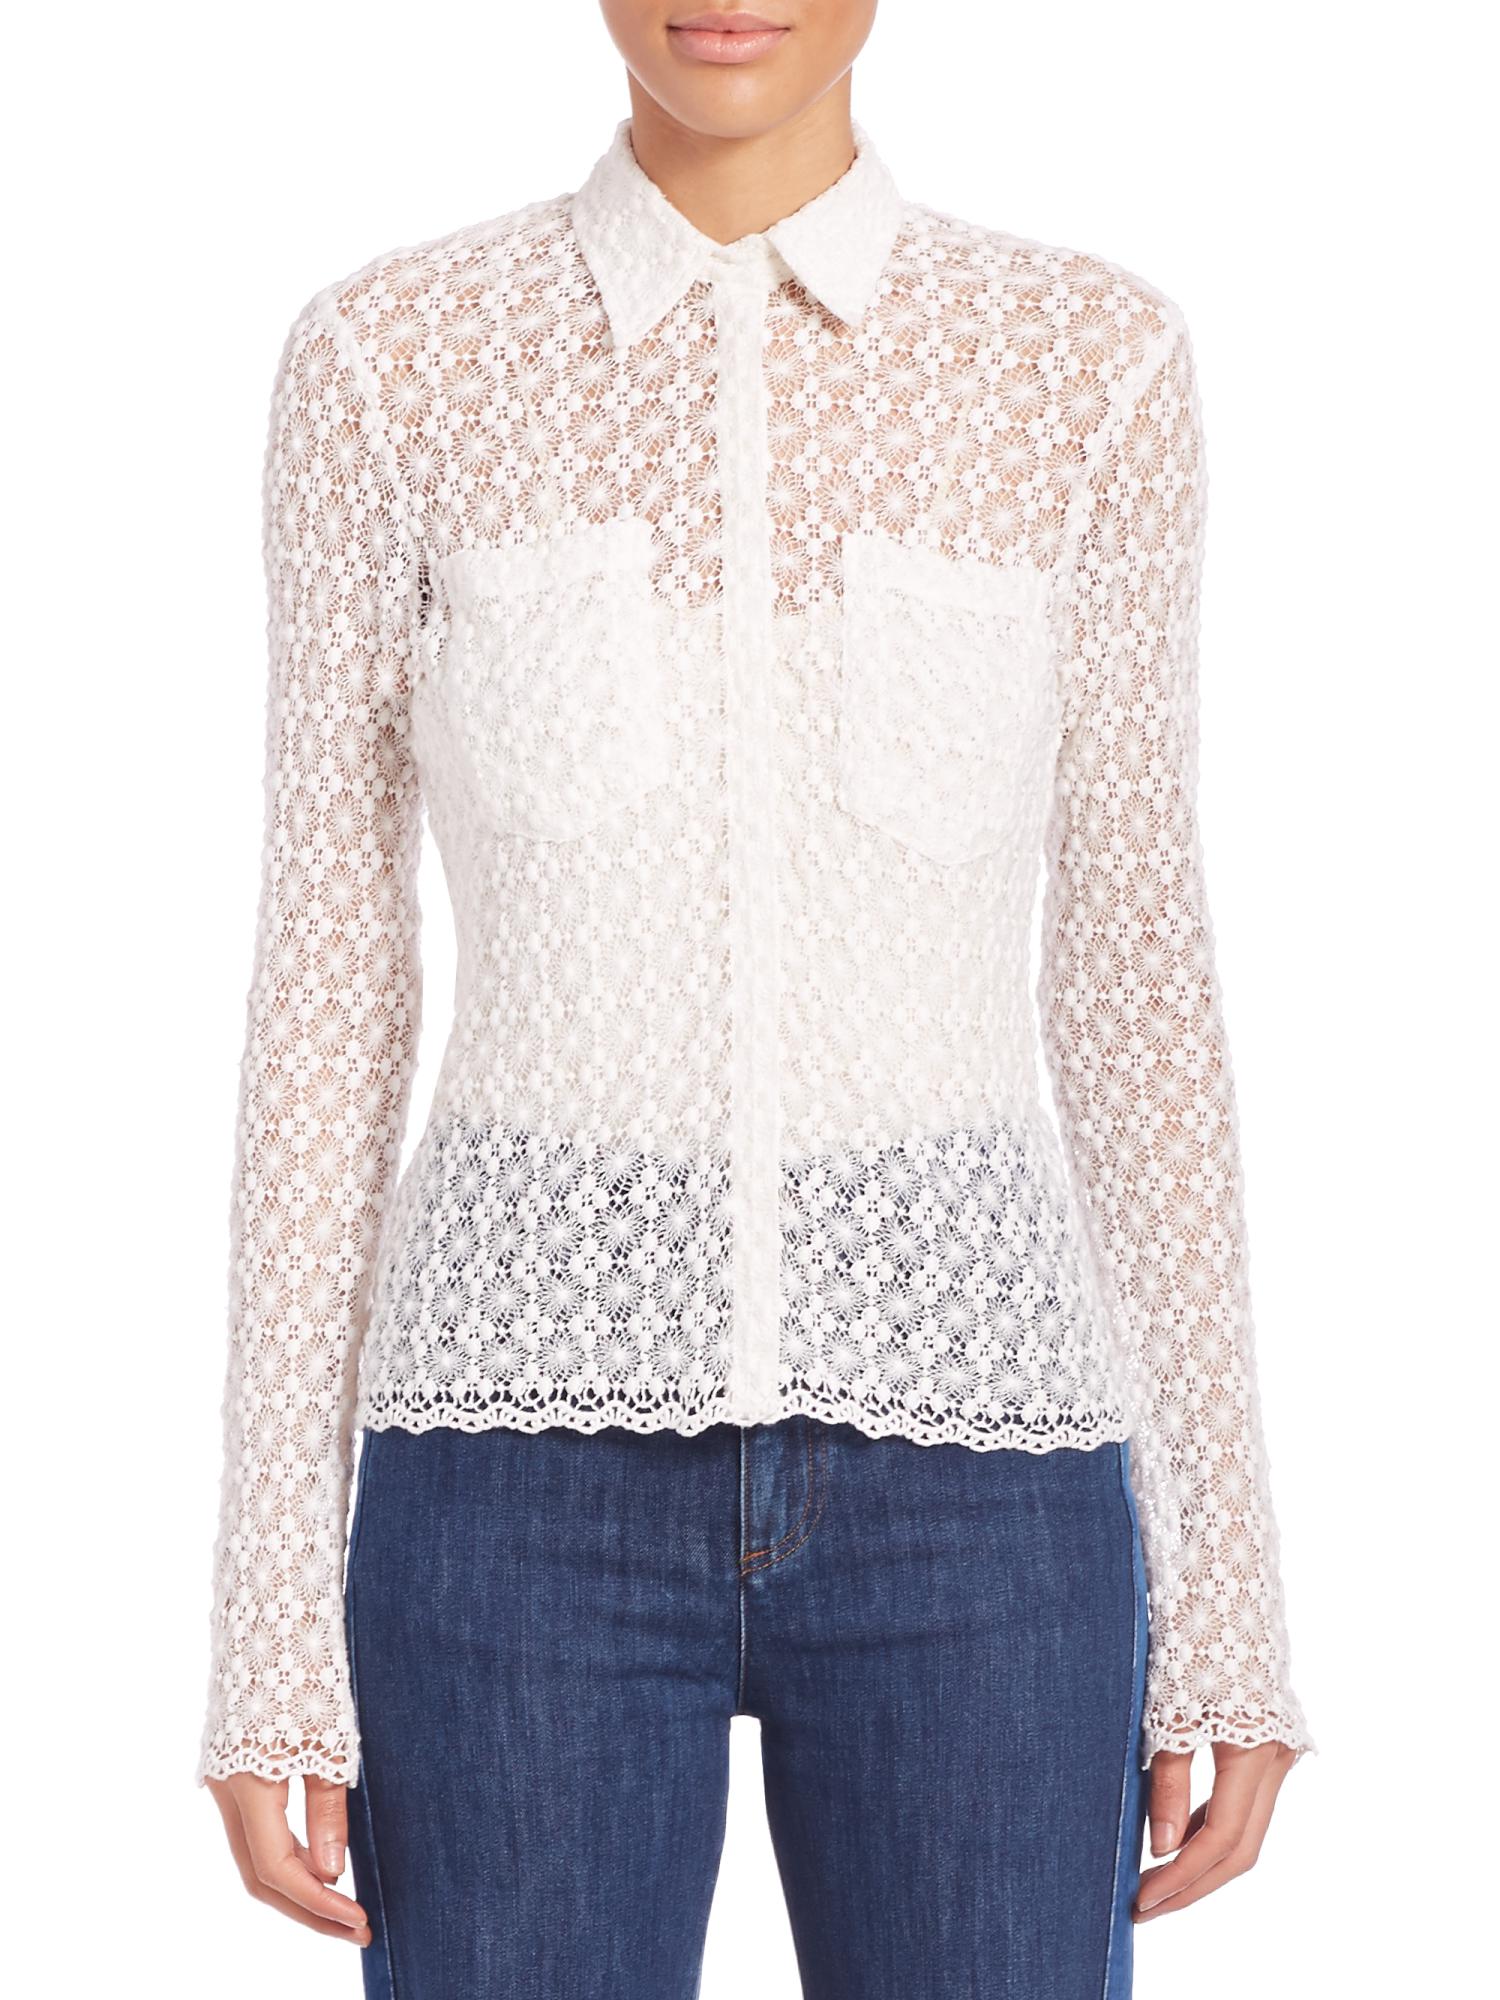 See by Chloé | floral lace shirt | Women's blouses & shirts | HighCollars